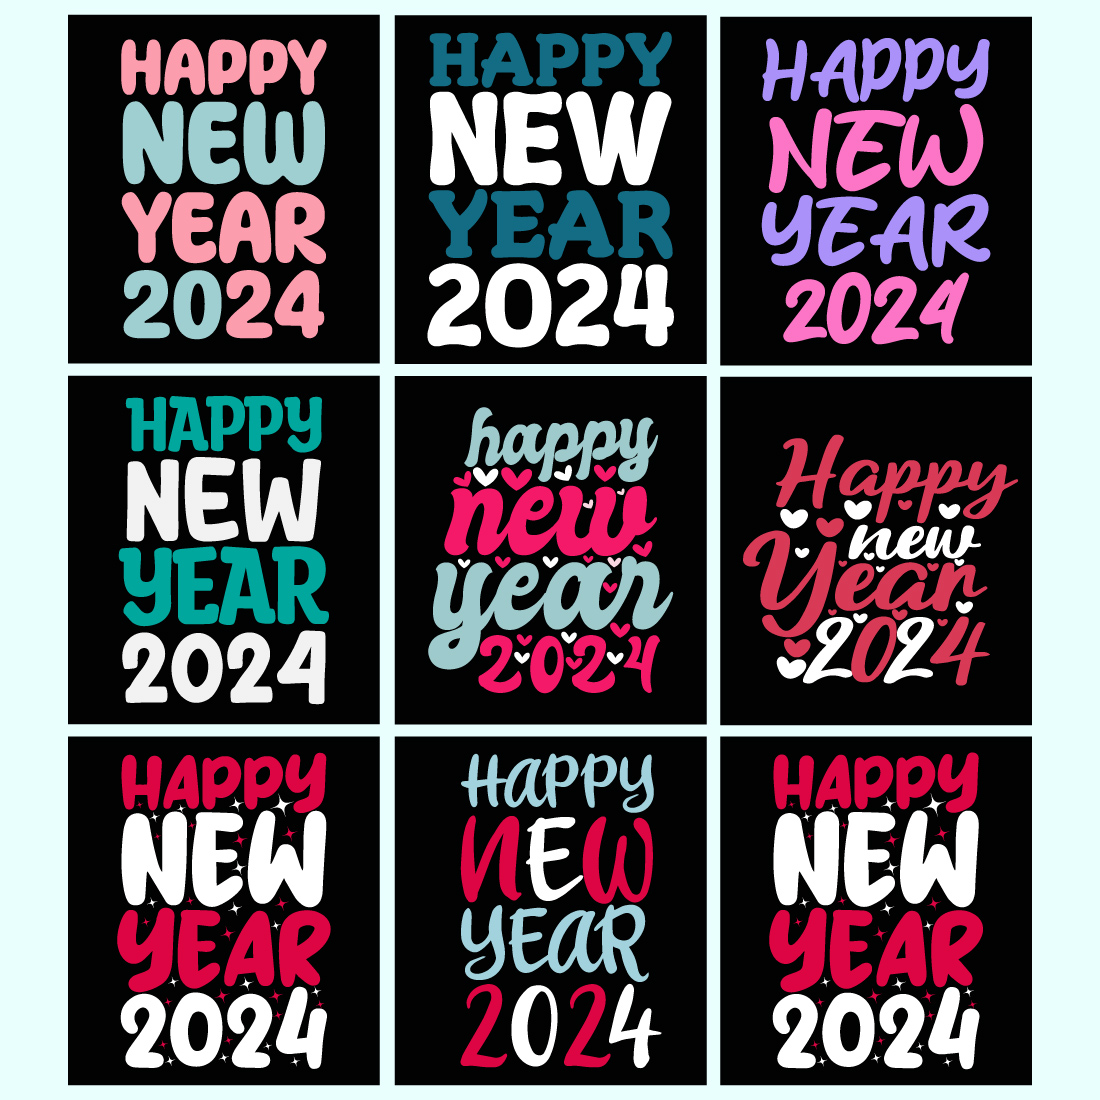 HAPPY NEW YEAR T SHIRT DESIGN 2024 preview image.